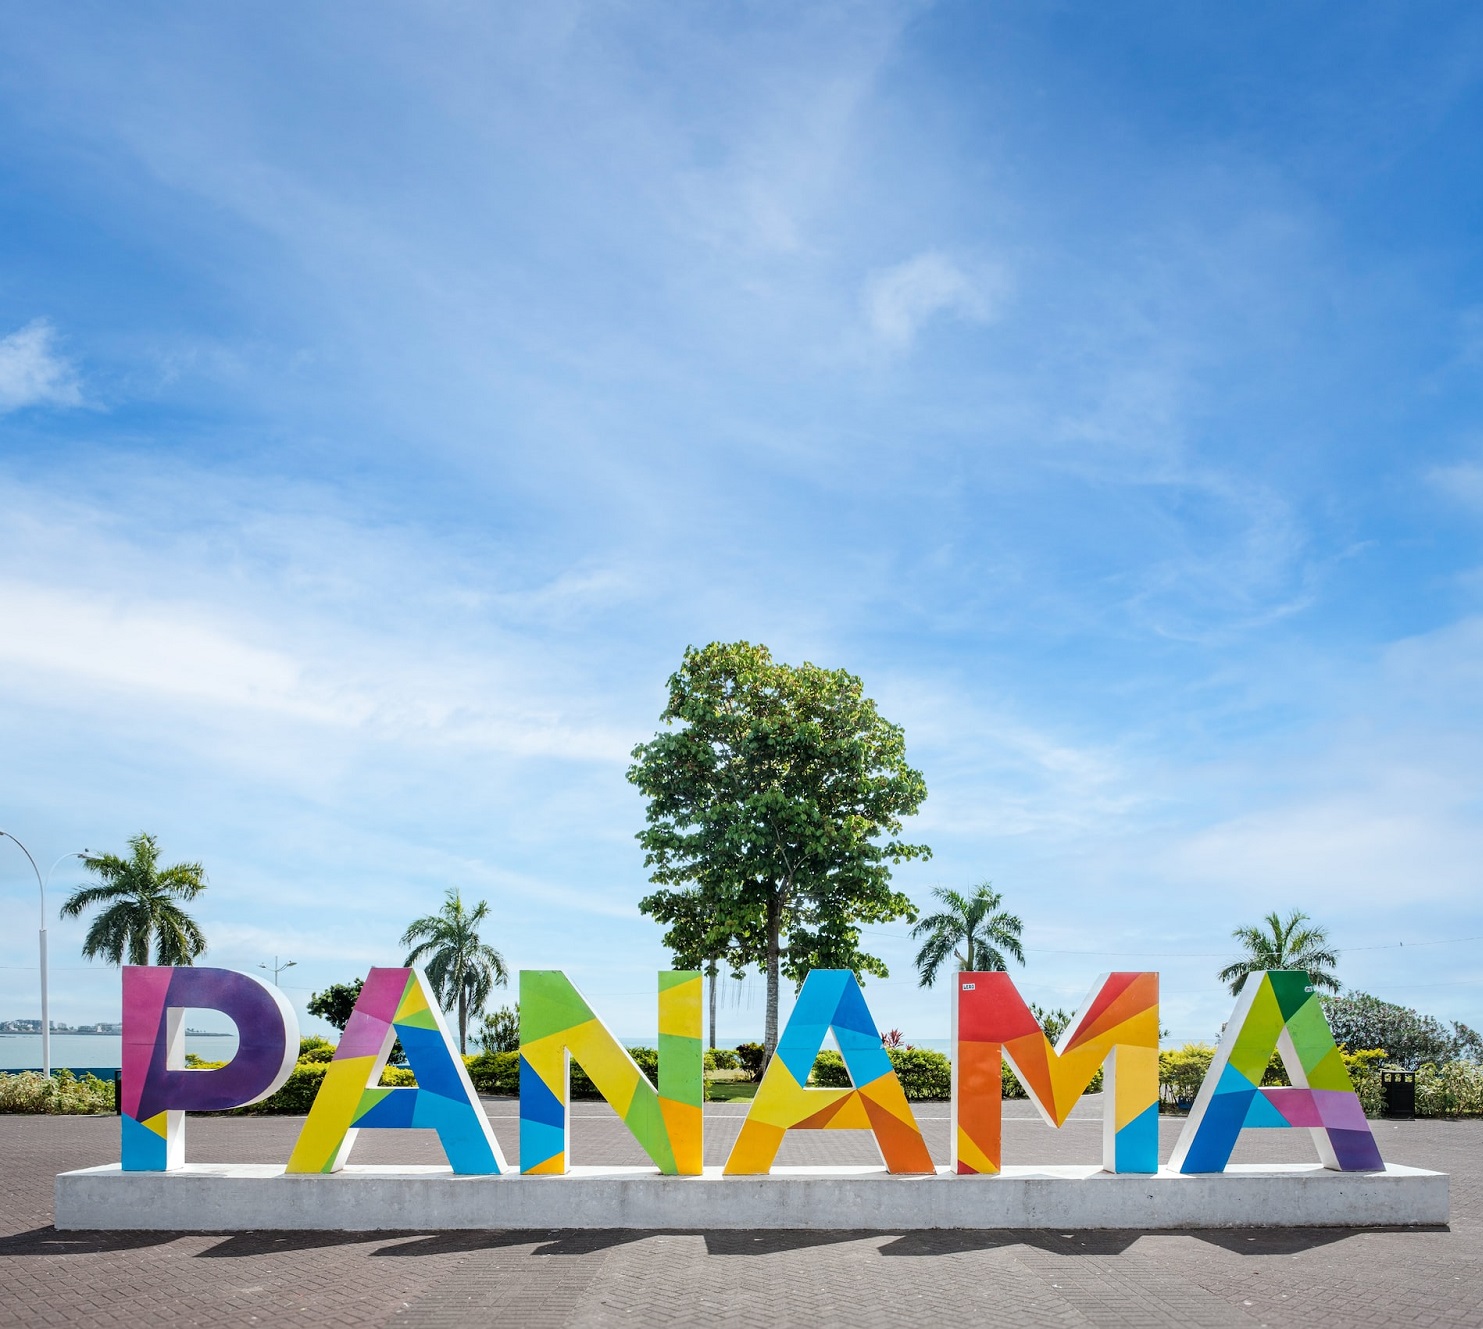 Panama Tours and Holiday Packages